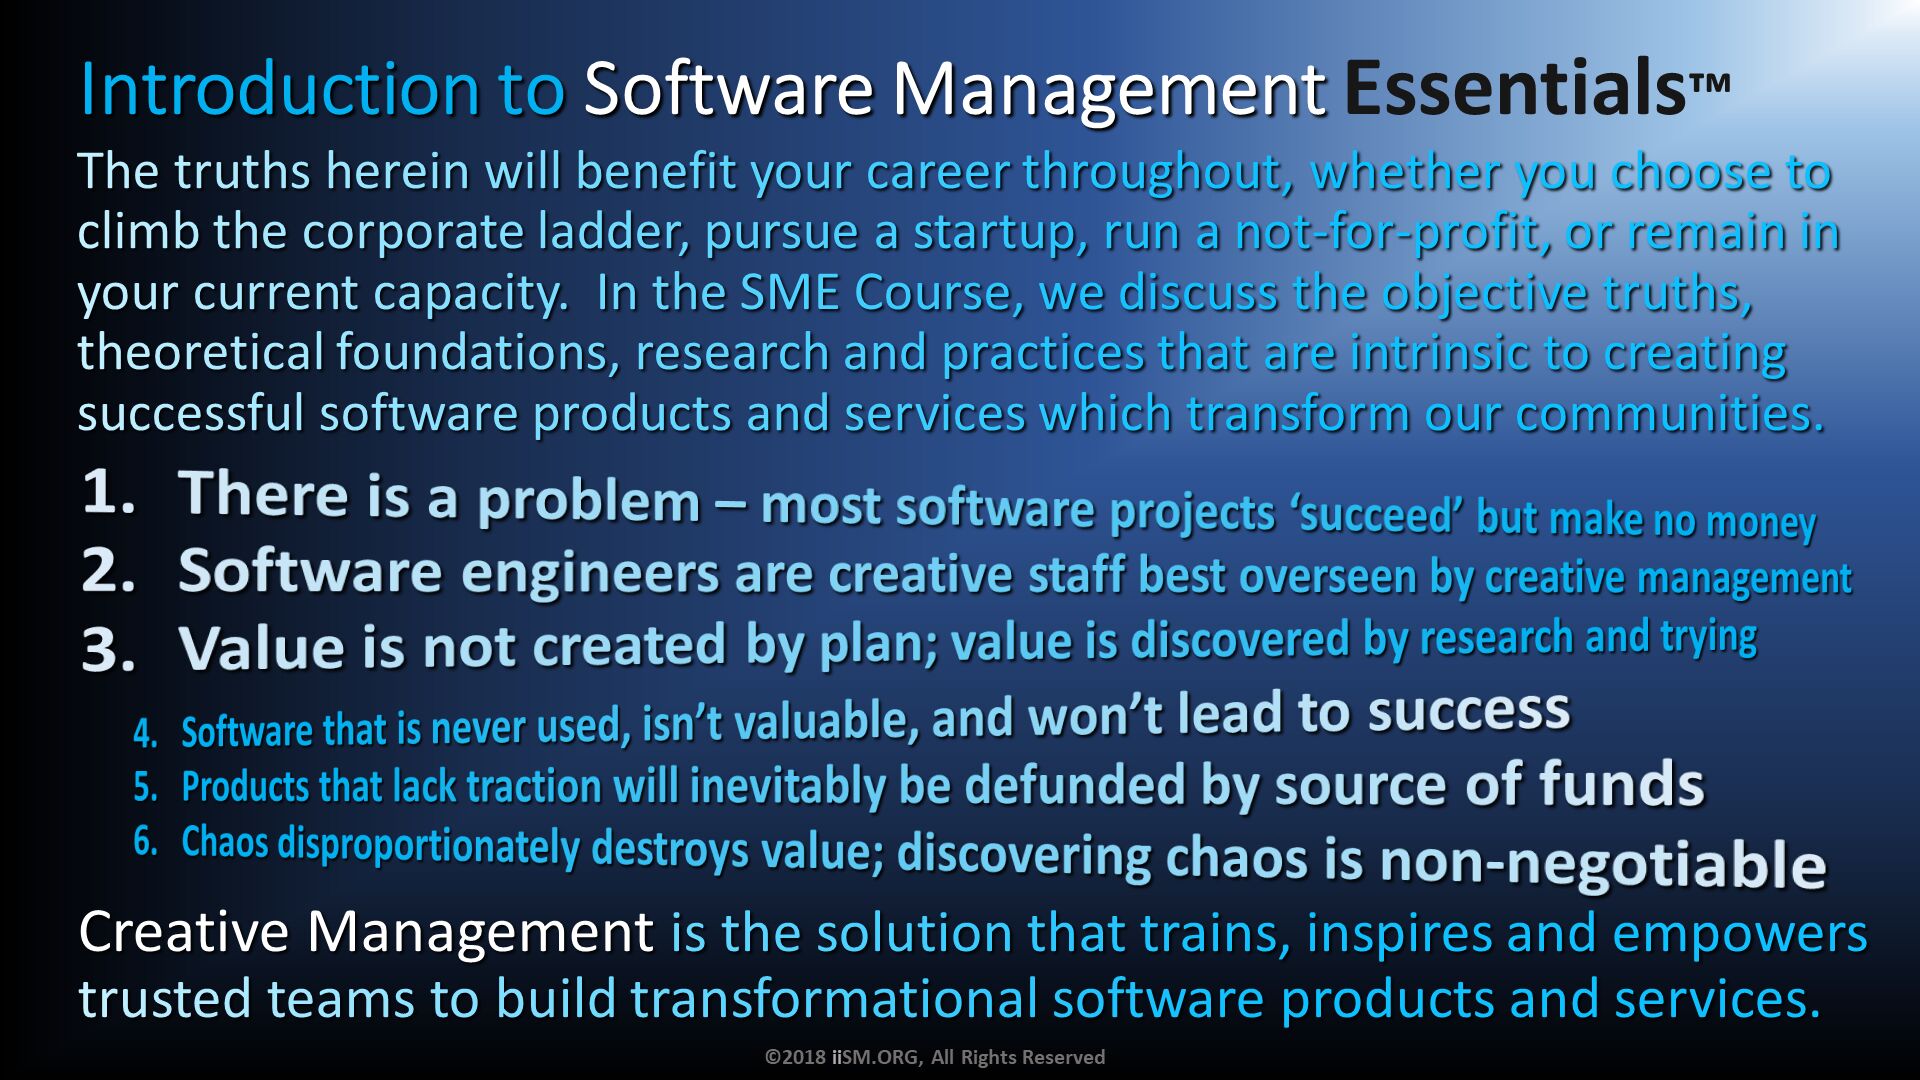 There is a problem – most software projects ‘succeed’ but make no money
Software engineers are creative staff best overseen by creative management
Value is not created by plan; value is discovered by research and trying. The truths herein will benefit your career throughout, whether you choose to climb the corporate ladder, pursue a startup, run a not-for-profit, or remain in your current capacity.  In the SME Course, we discuss the objective truths, theoretical foundations, research and practices that are intrinsic to creating successful software products and services which transform our communities.
. Software that is never used, isn’t valuable, and won’t lead to success
Products that lack traction will inevitably be defunded by source of funds
Chaos disproportionately destroys value; discovering chaos is non-negotiable . Creative Management is the solution that trains, inspires and empowers trusted teams to build transformational software products and services. ©2018 iiSM.ORG, All Rights Reserved. Introduction to Software Management Essentials™. 